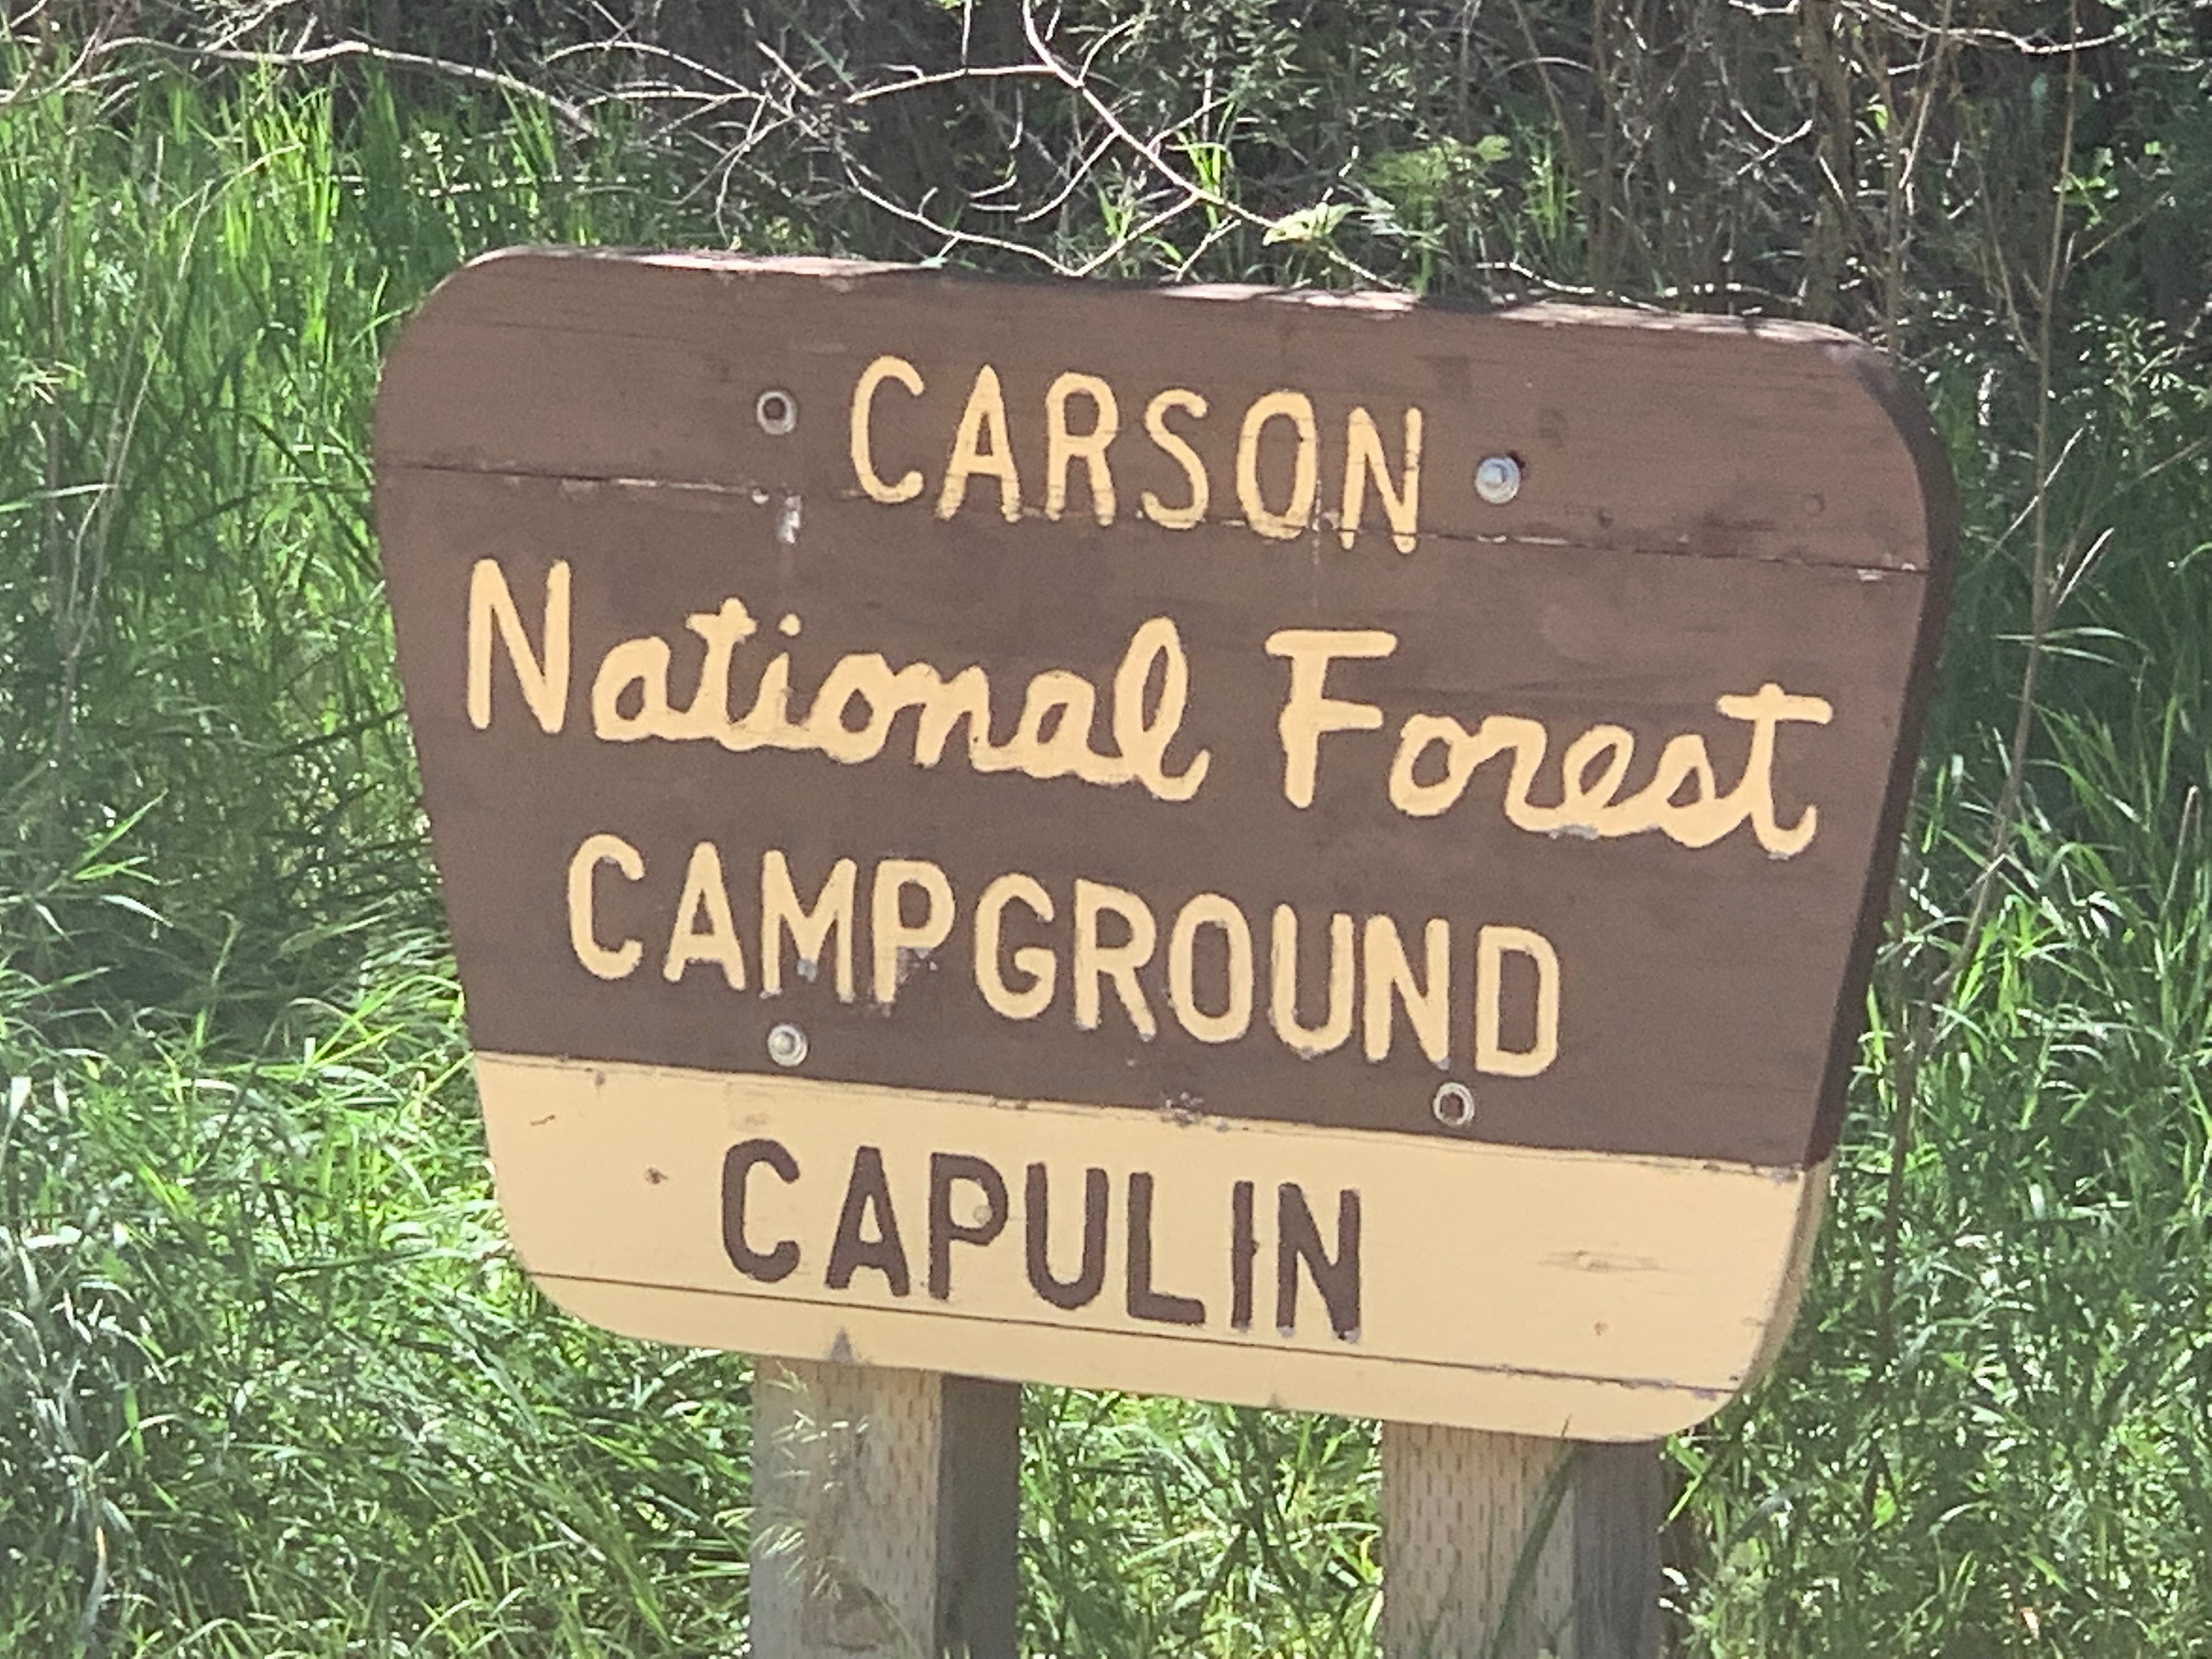 Camper submitted image from Capulin Campground - 5